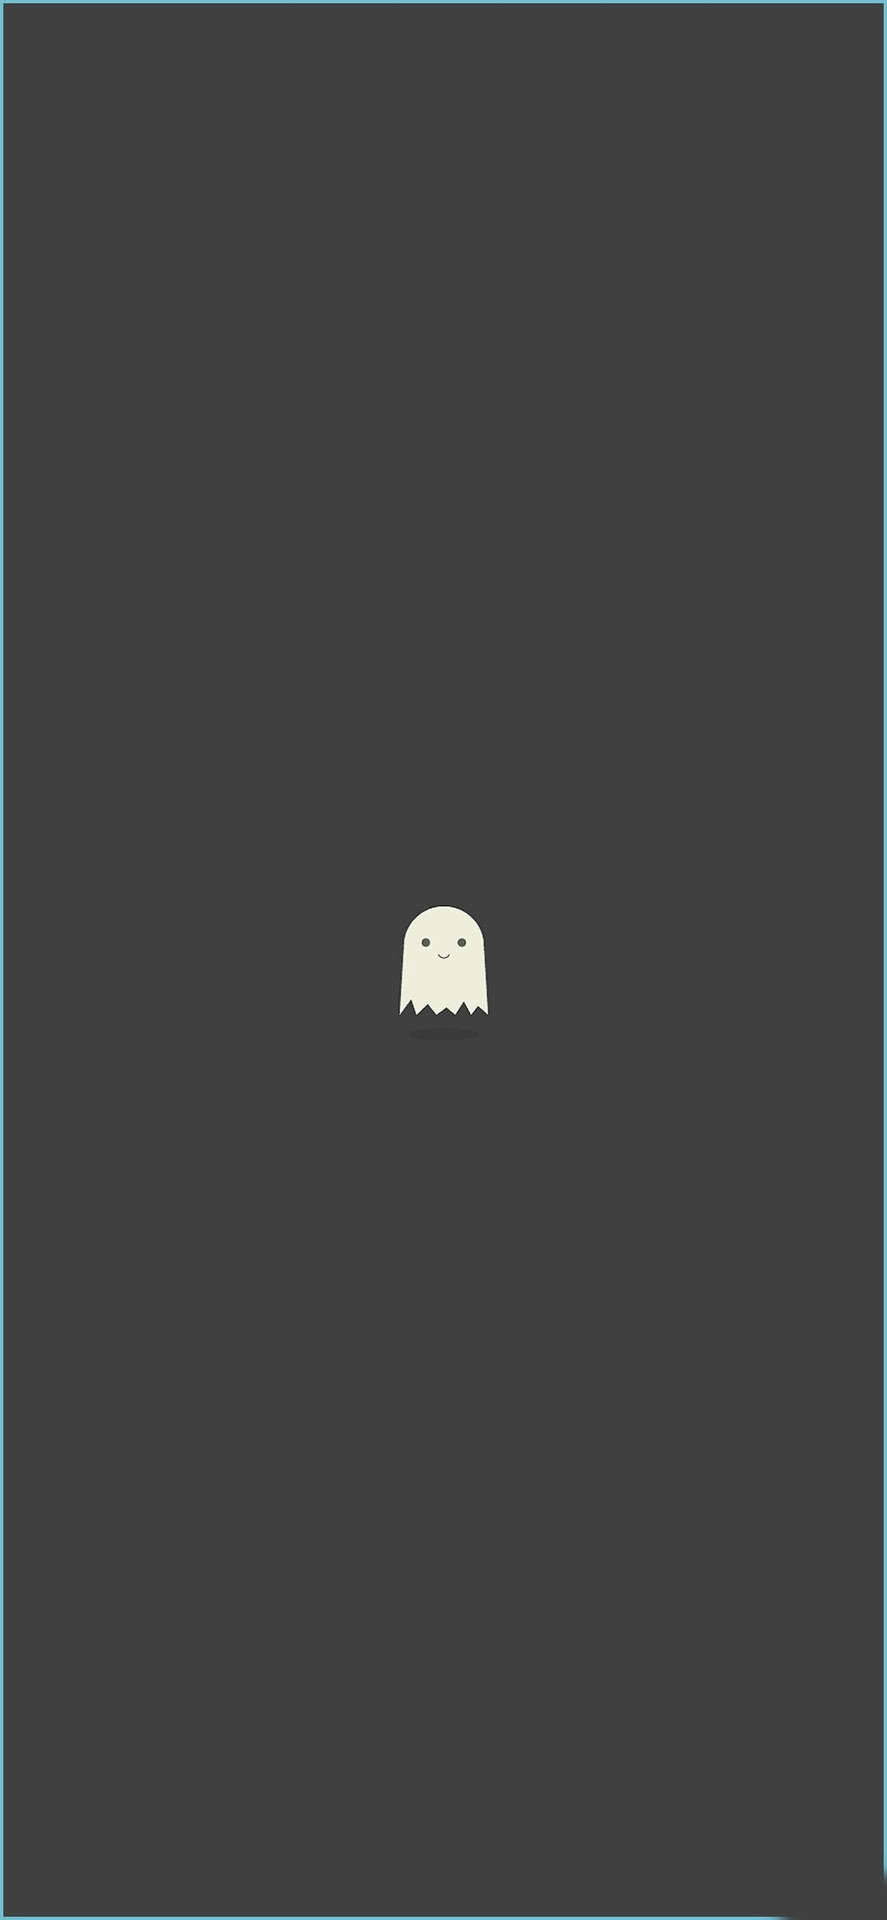 Delightful Ghost Aesthetic Gray Background